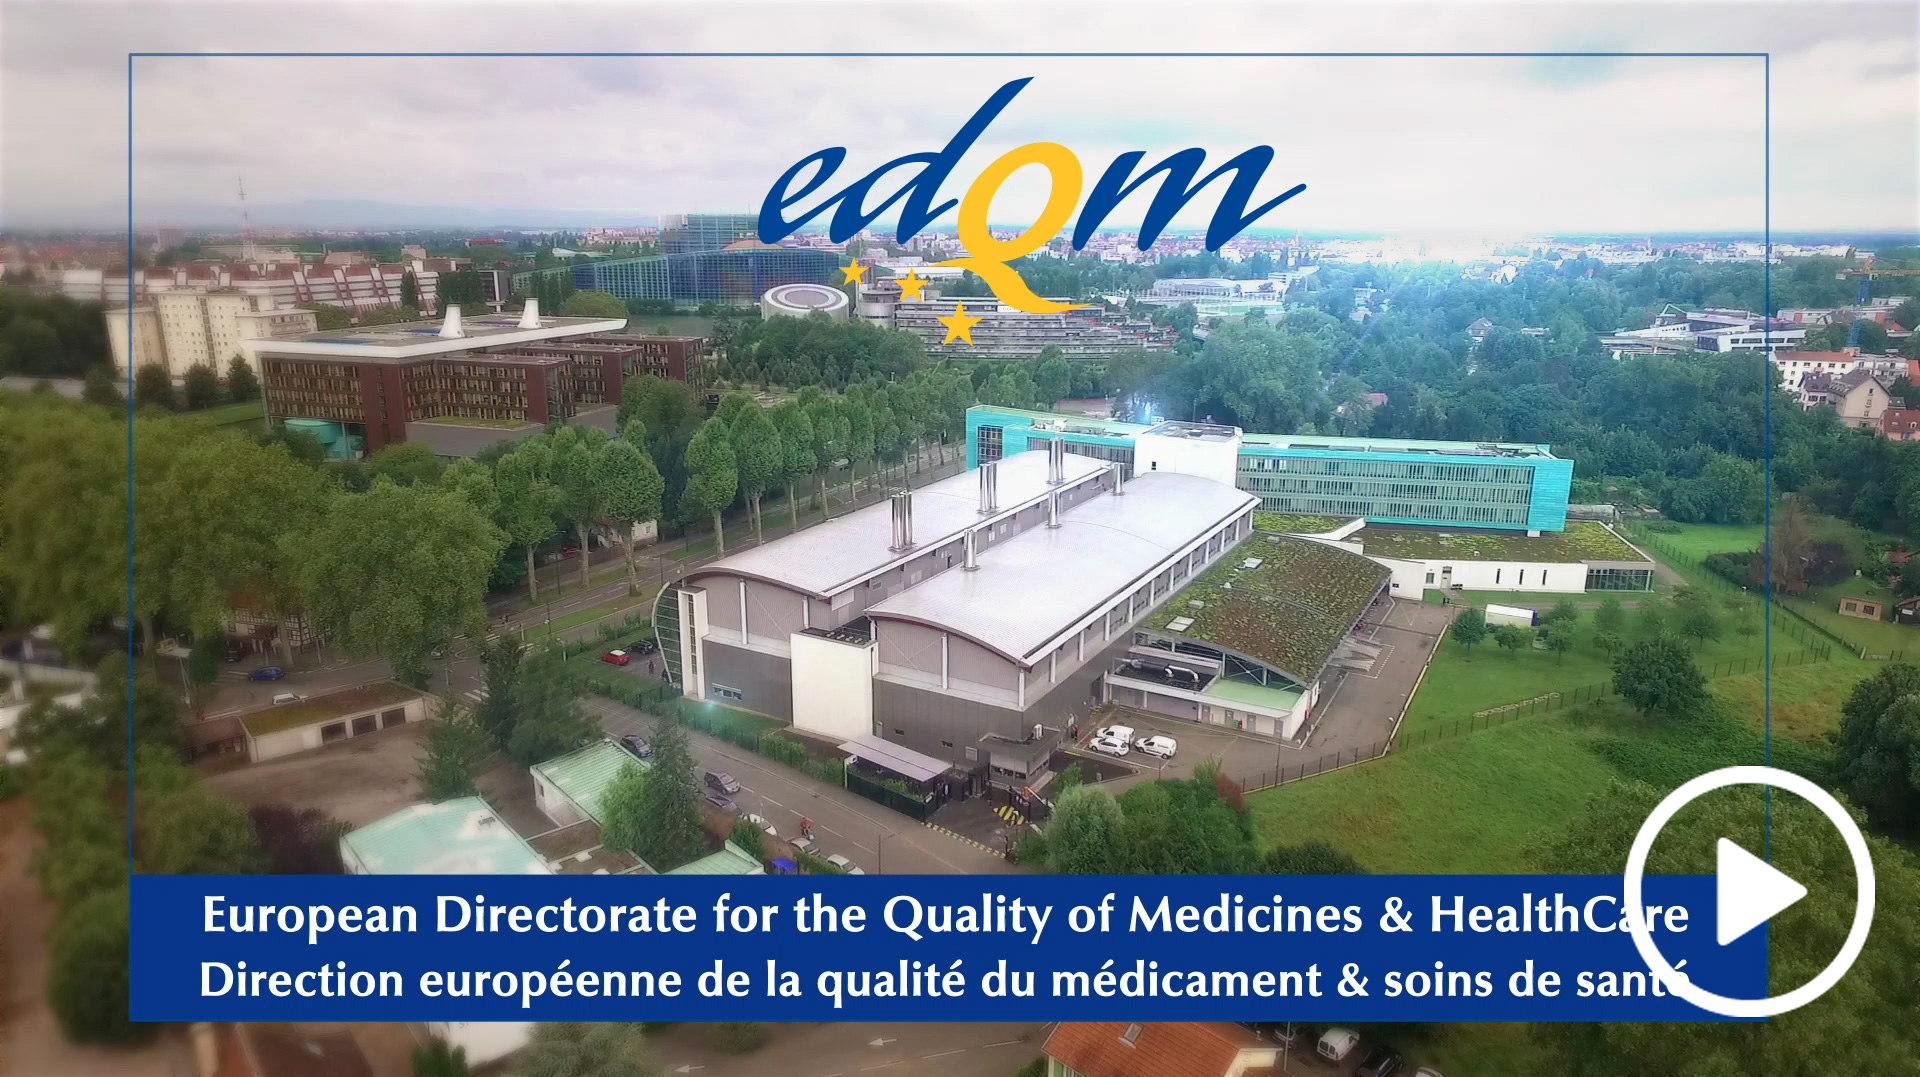 Presentation of the EDQM and its activities